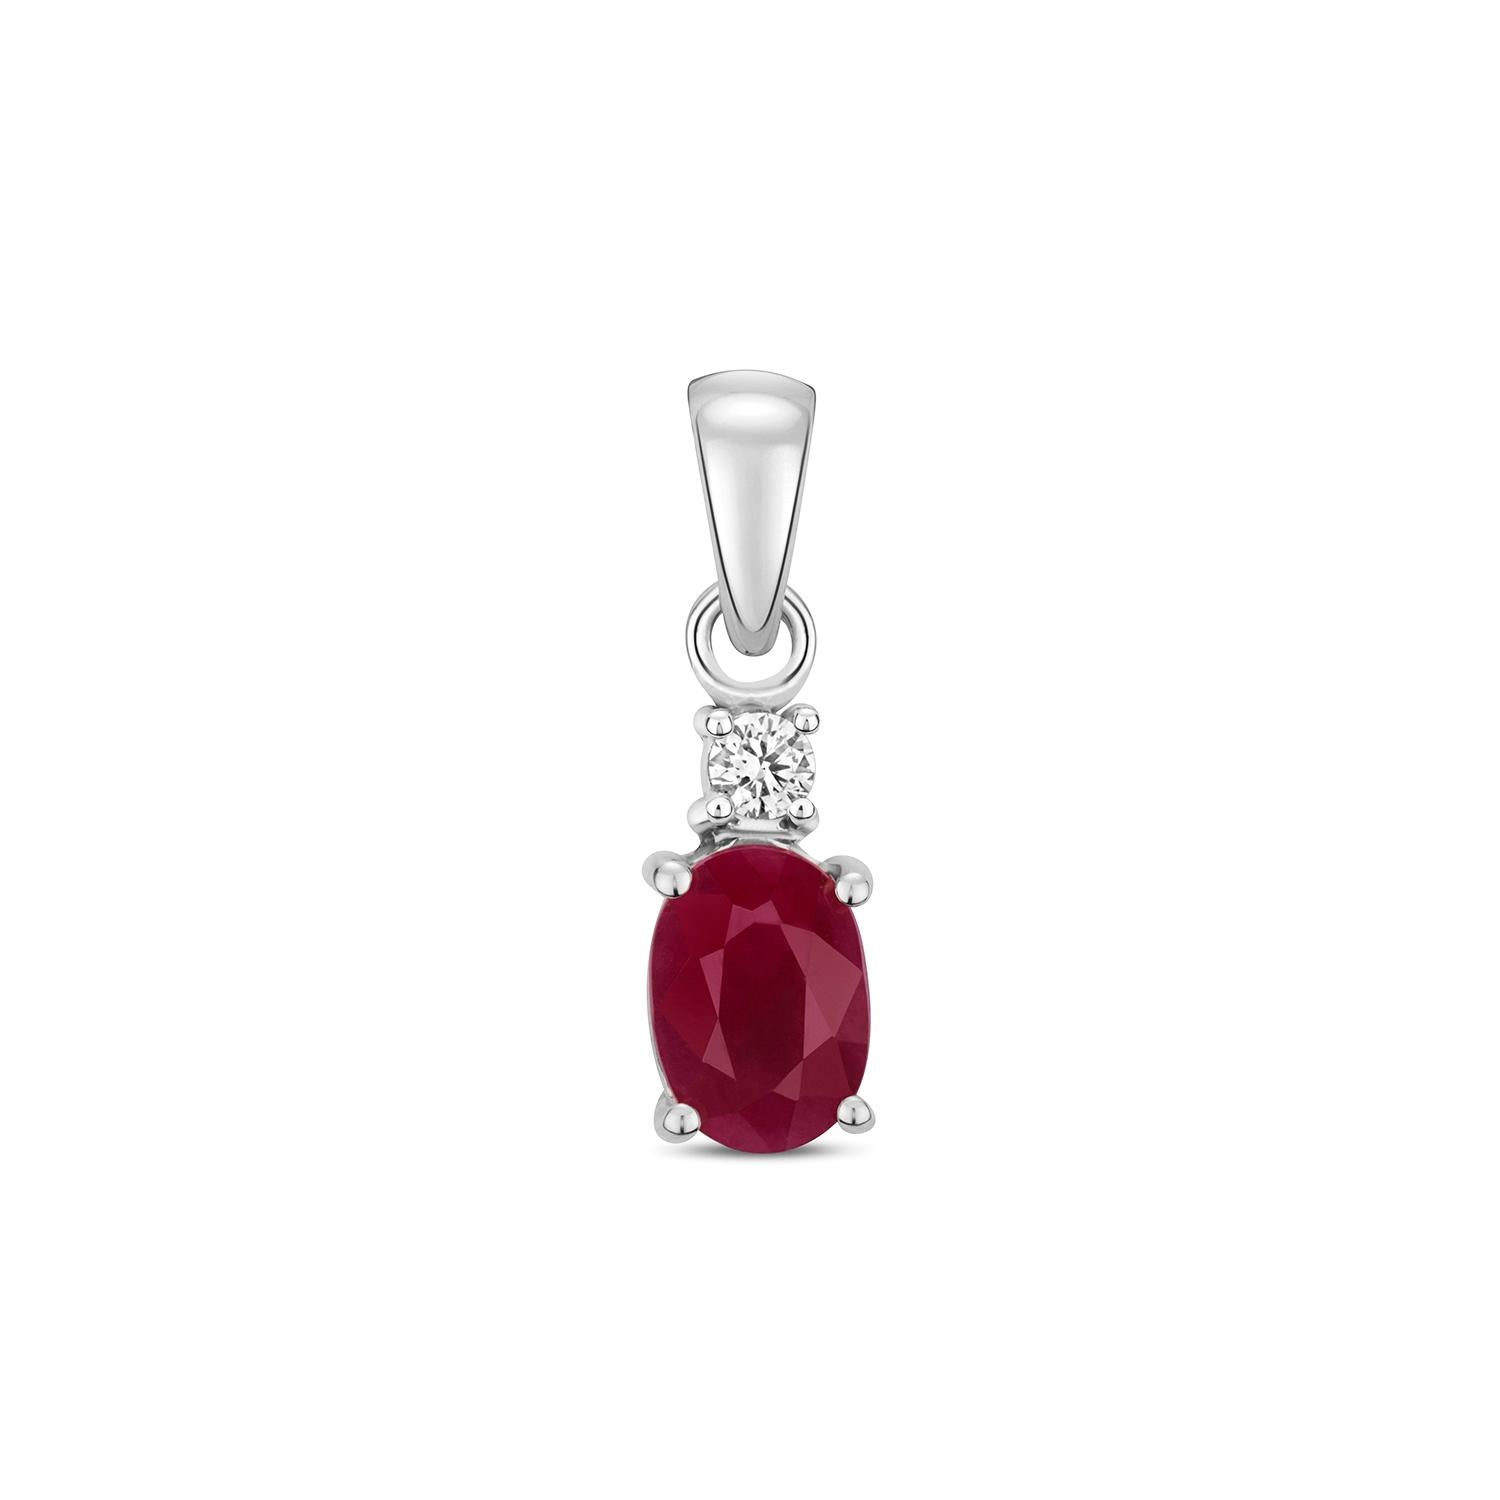 DIAMOND AND RUBY OVAL PENDANT

9CT W/G OV/6X4 RUB

Weight: 0.8g

Number Of Stones:1

Total Carates:0.500